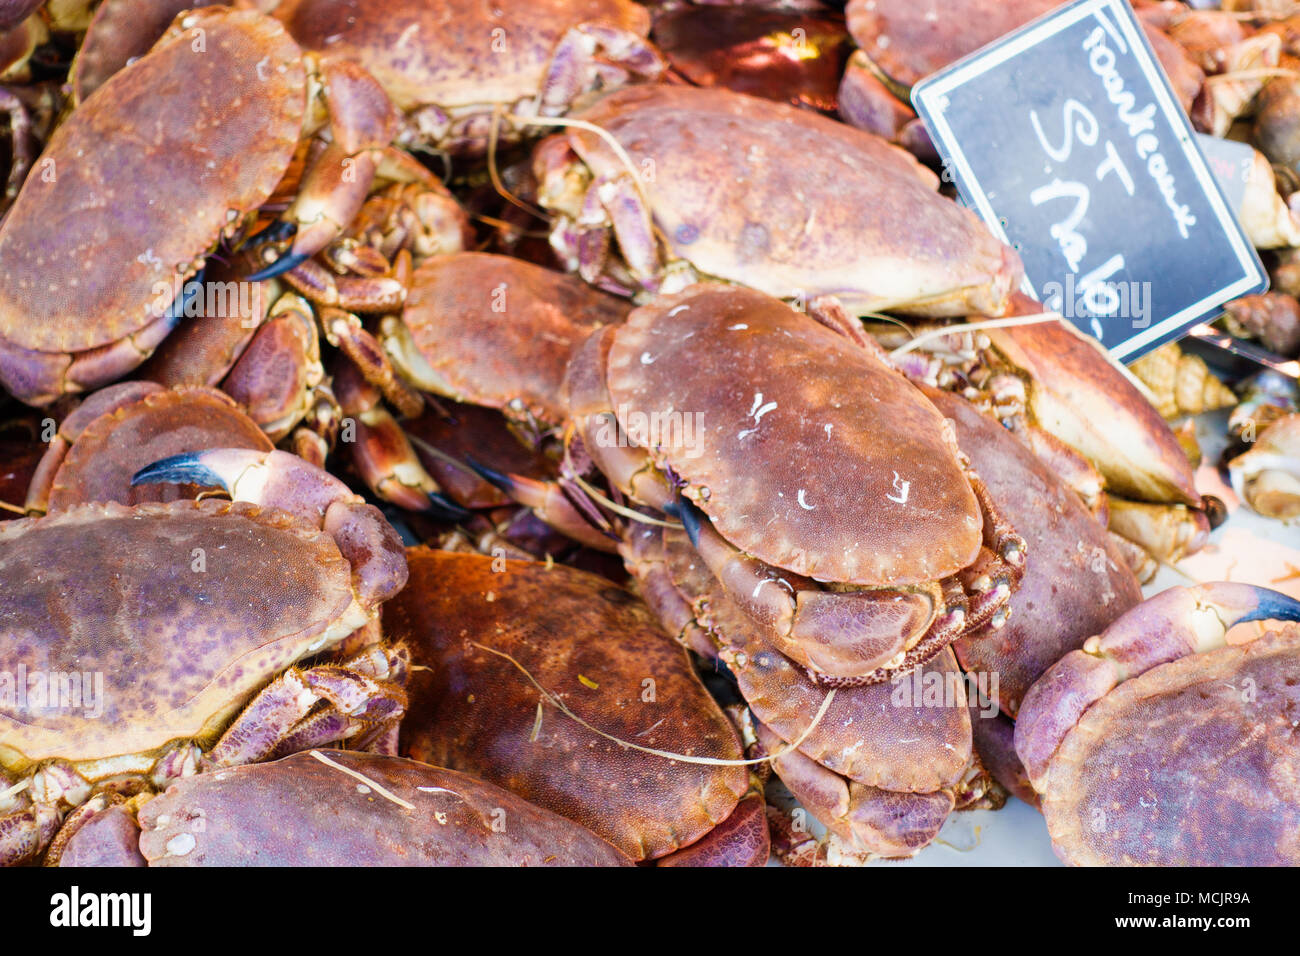 Fresh Cancer Irroratus crabs for sale at fish market Stock Photo